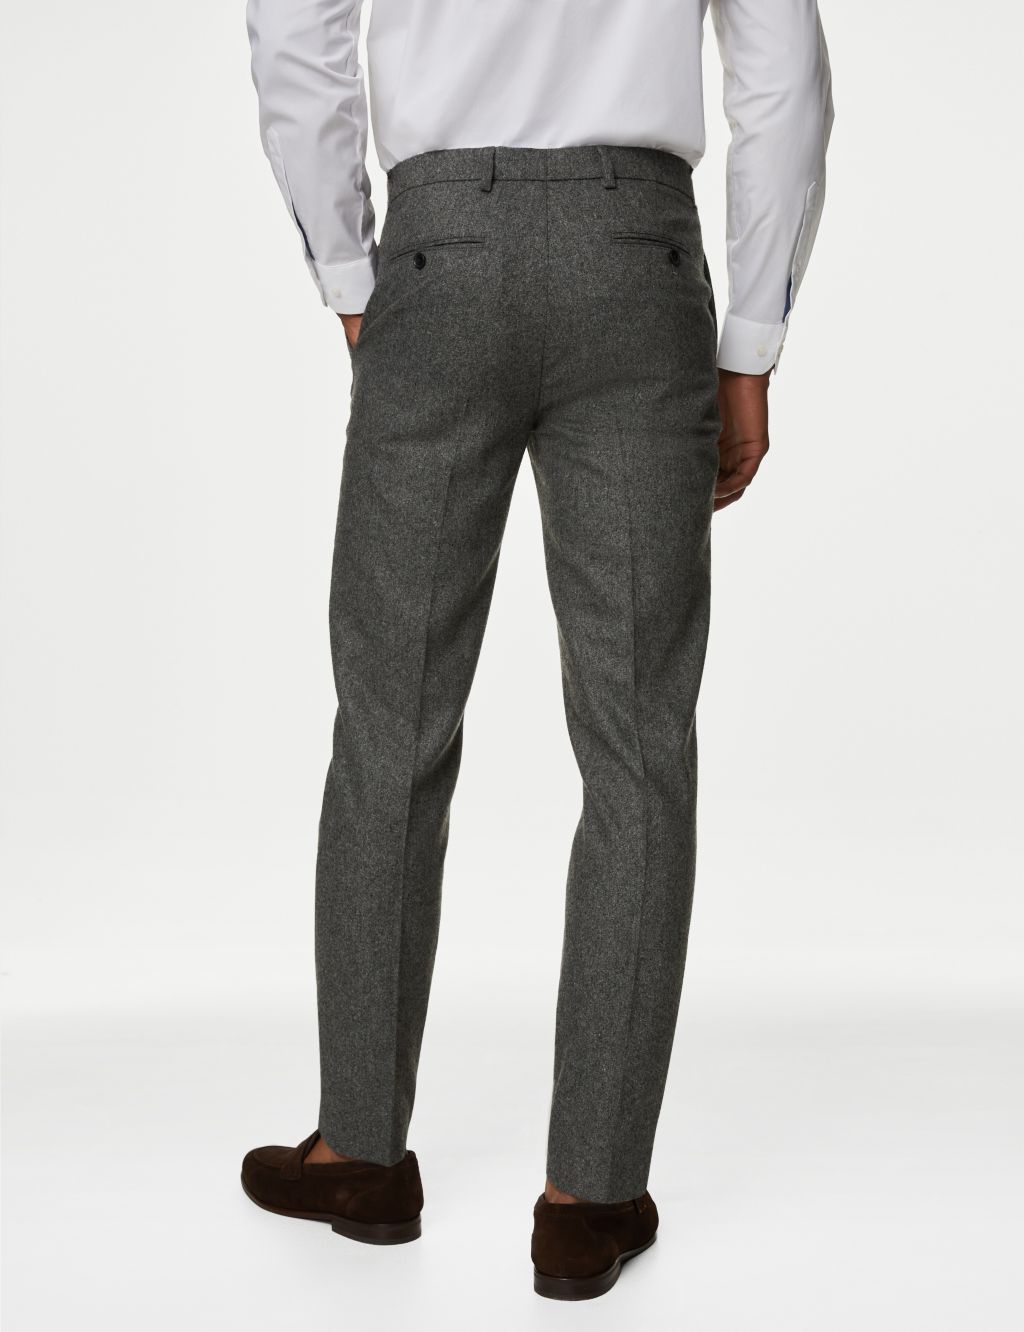 Tailored Fit Italian Wool Rich Suit Trousers image 4